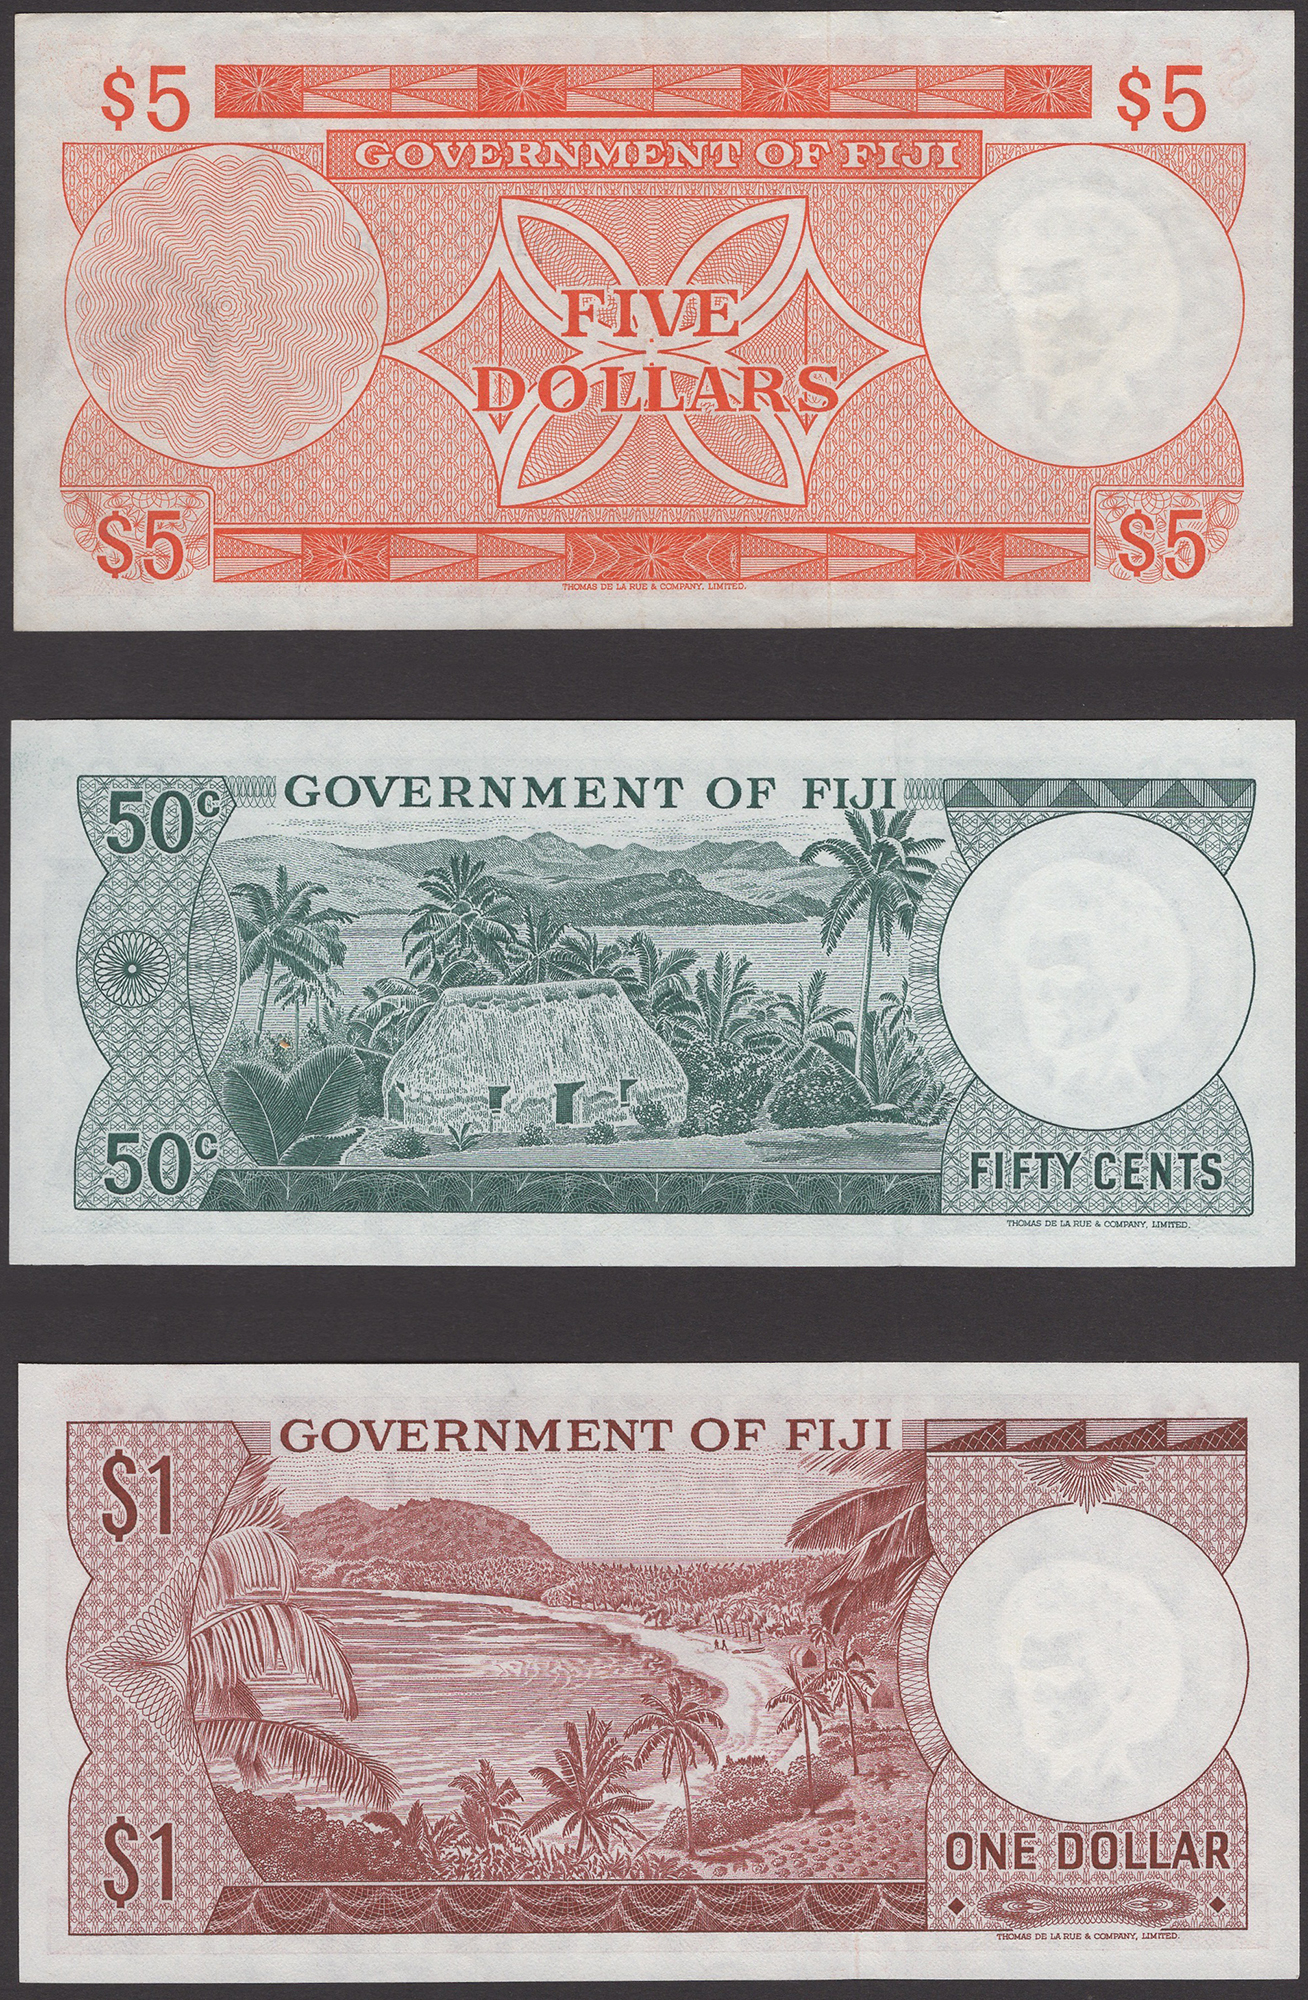 Government of Fiji, 50 Cents, $1, $2 and $5, ND (1971), prefixes A/3, A/3, A/4 and A/1,... - Image 2 of 4